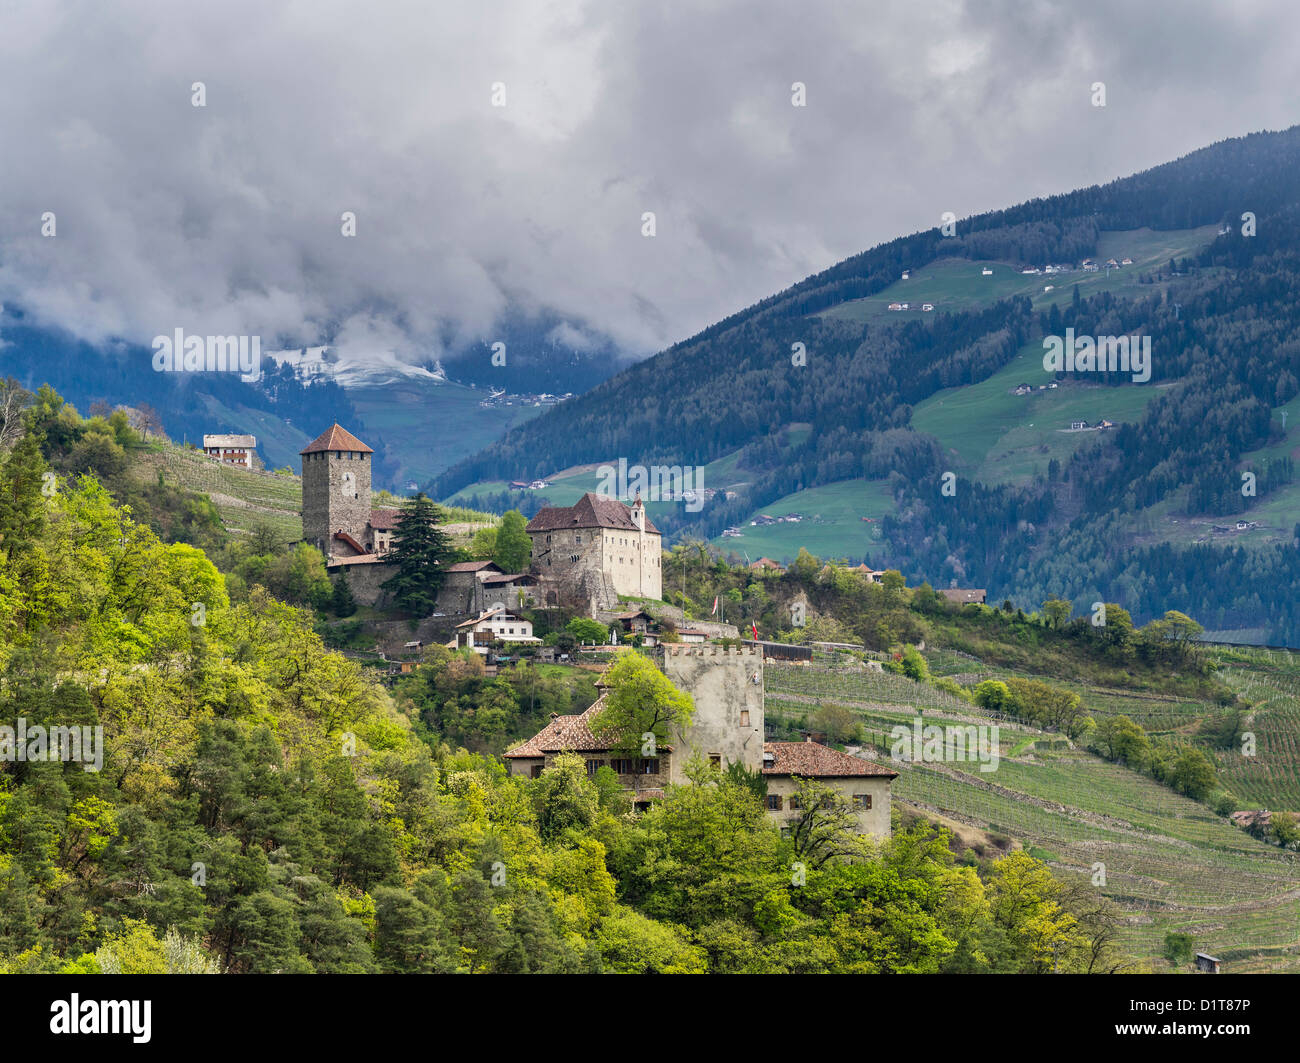 Tirol (or Tyrol) Castle near Meran in South Tyrol. It is a tourist attraction and museum. Italy, South Tyrol. Stock Photo